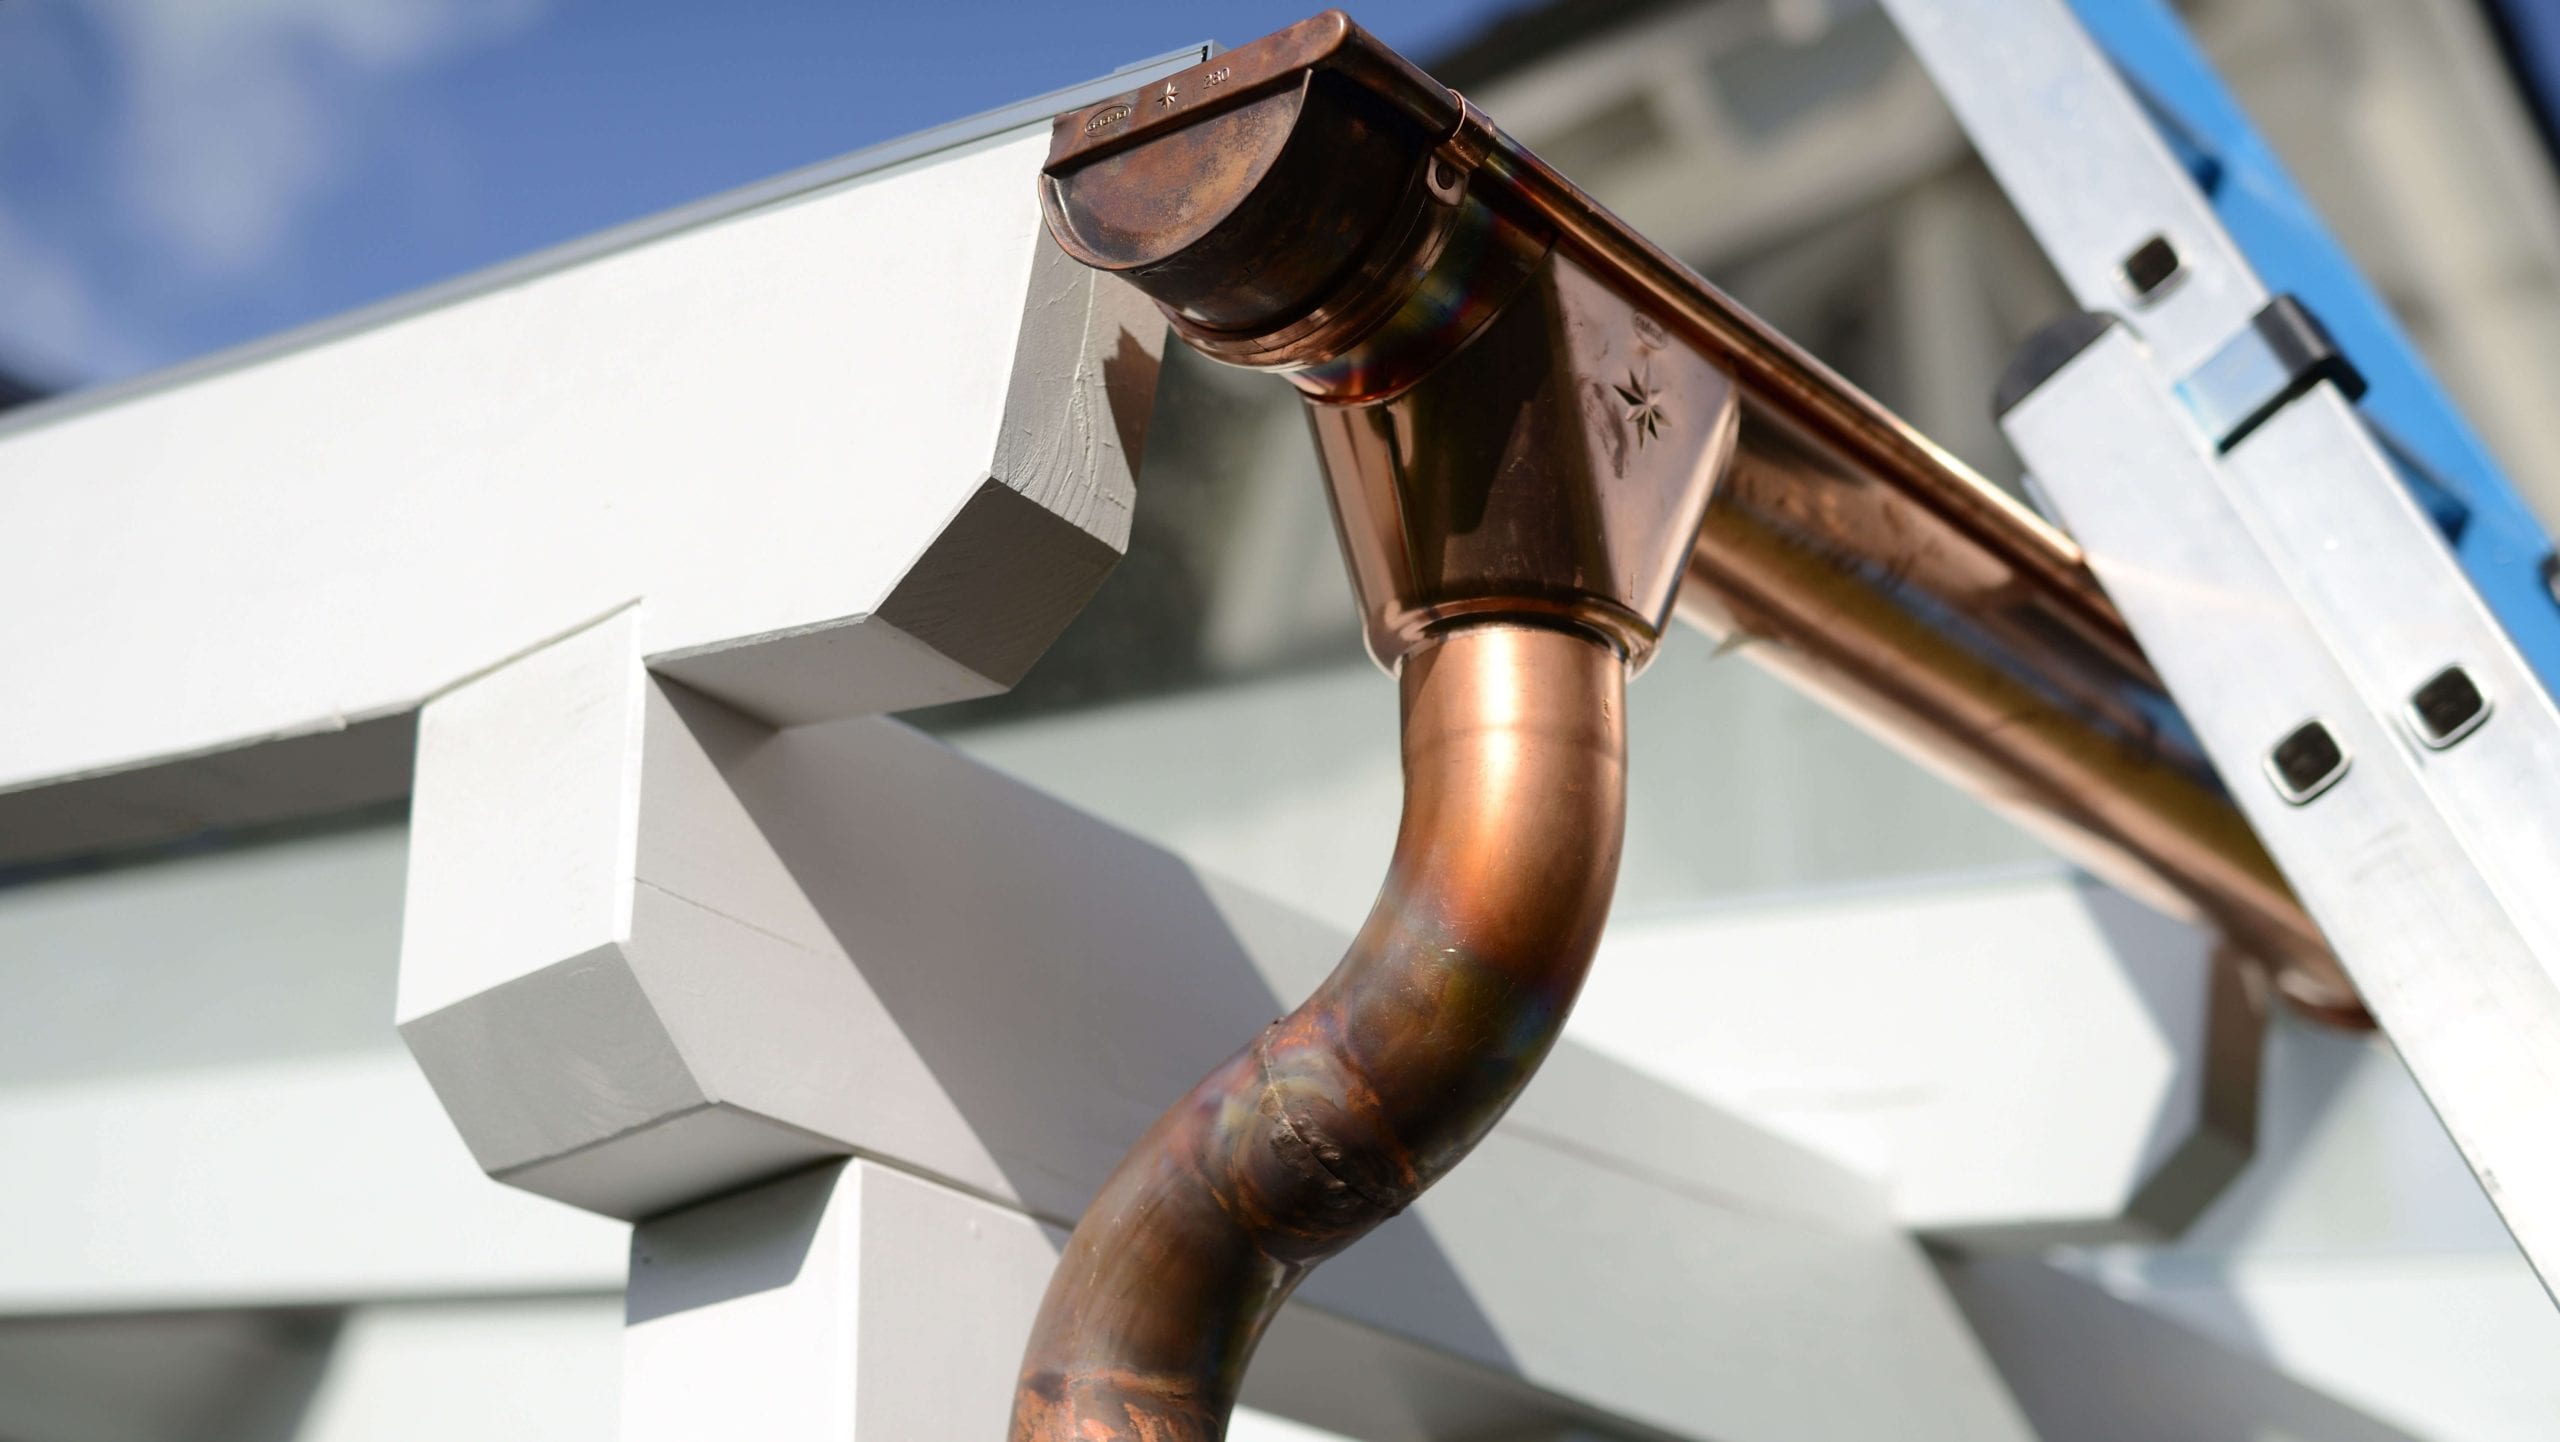 Make your property stand out with copper gutters. Contact for gutter installation in Plano